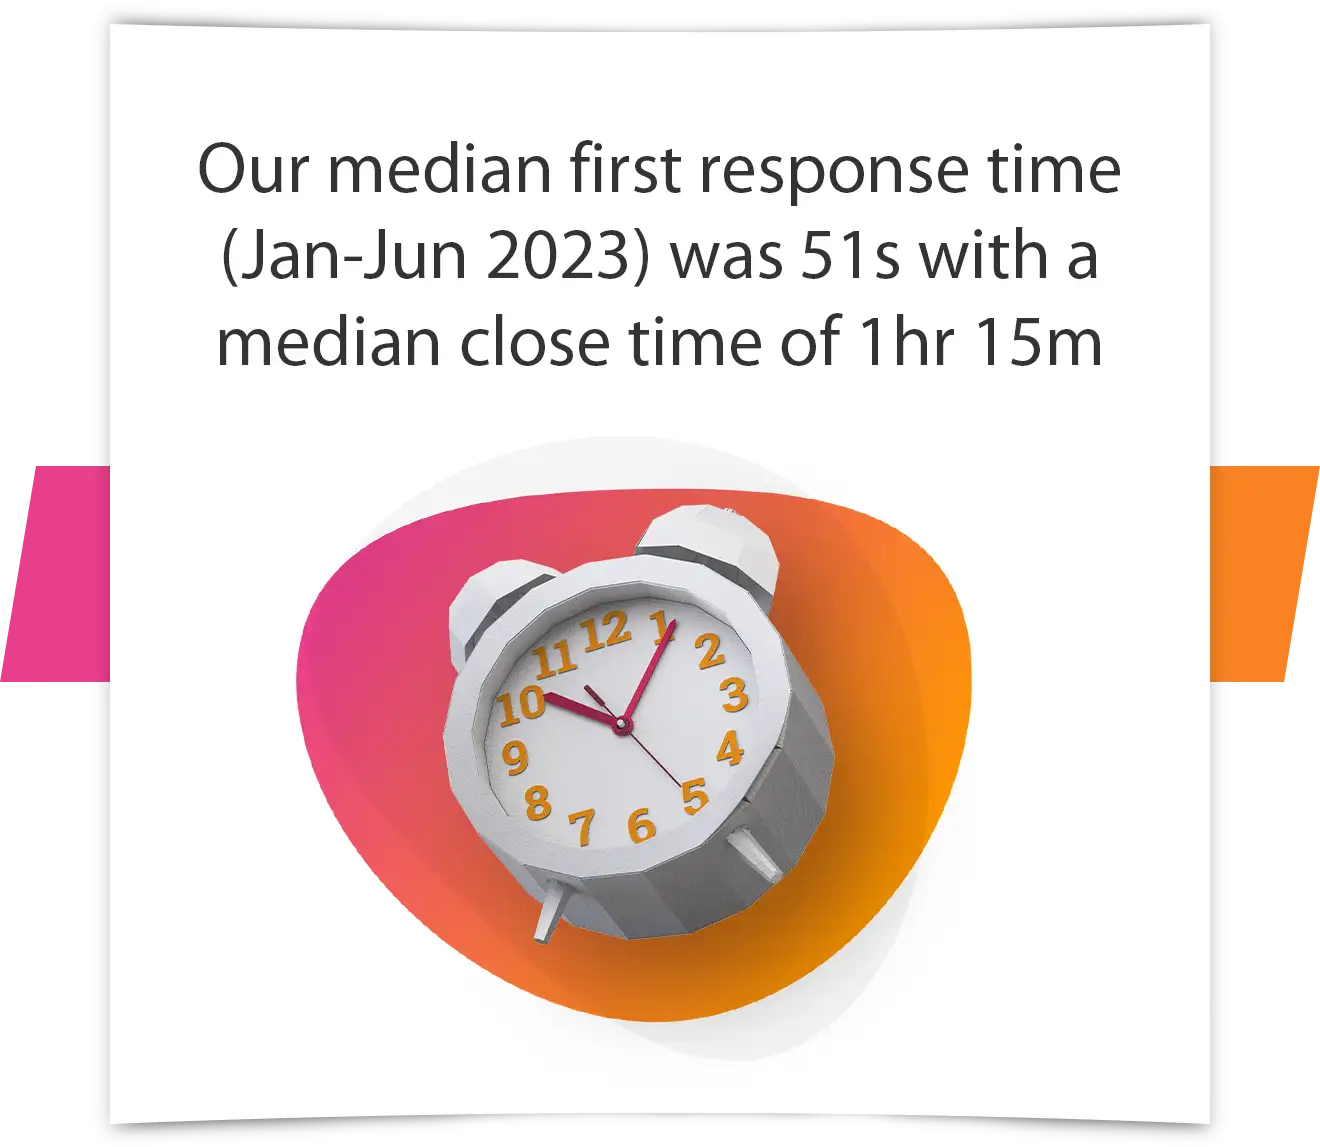 Text 'Our median first response time (Jan-Jun 2023) was 51s with a median close time of 1hr 15m' with an image of a clock